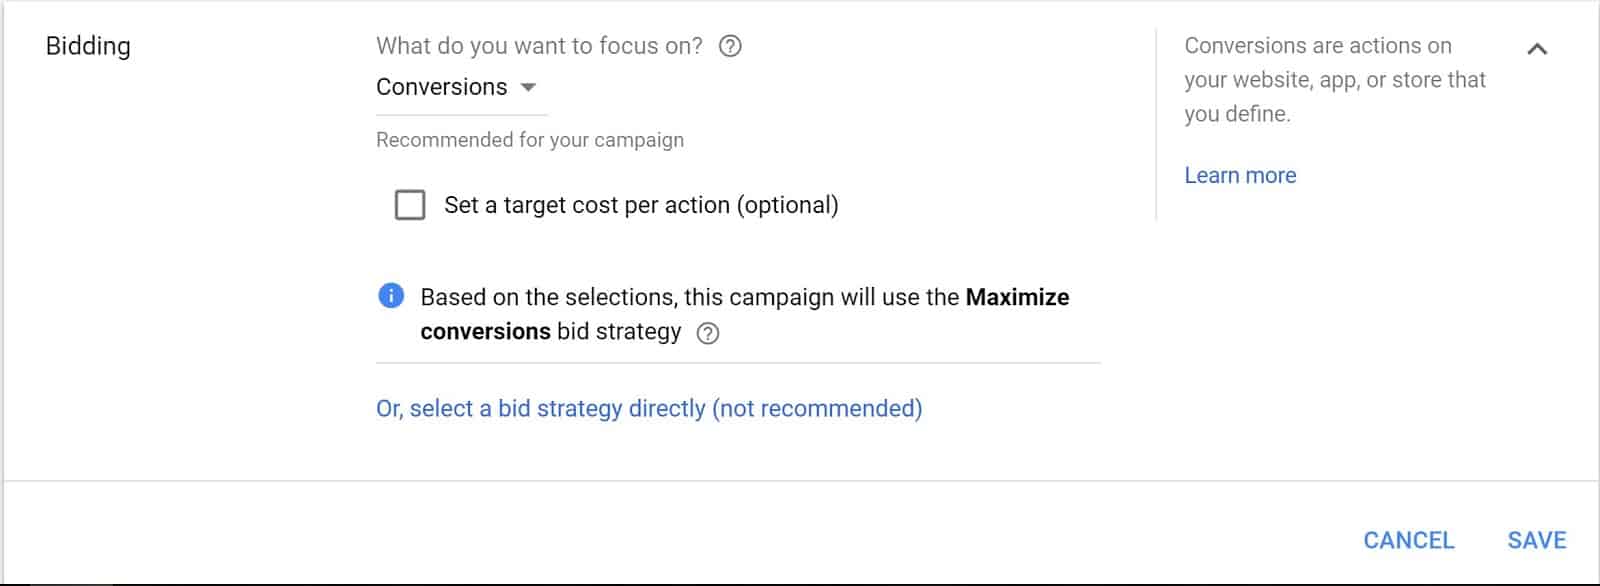 Enhanced Bidding Automation Types in Google Ads Experiments